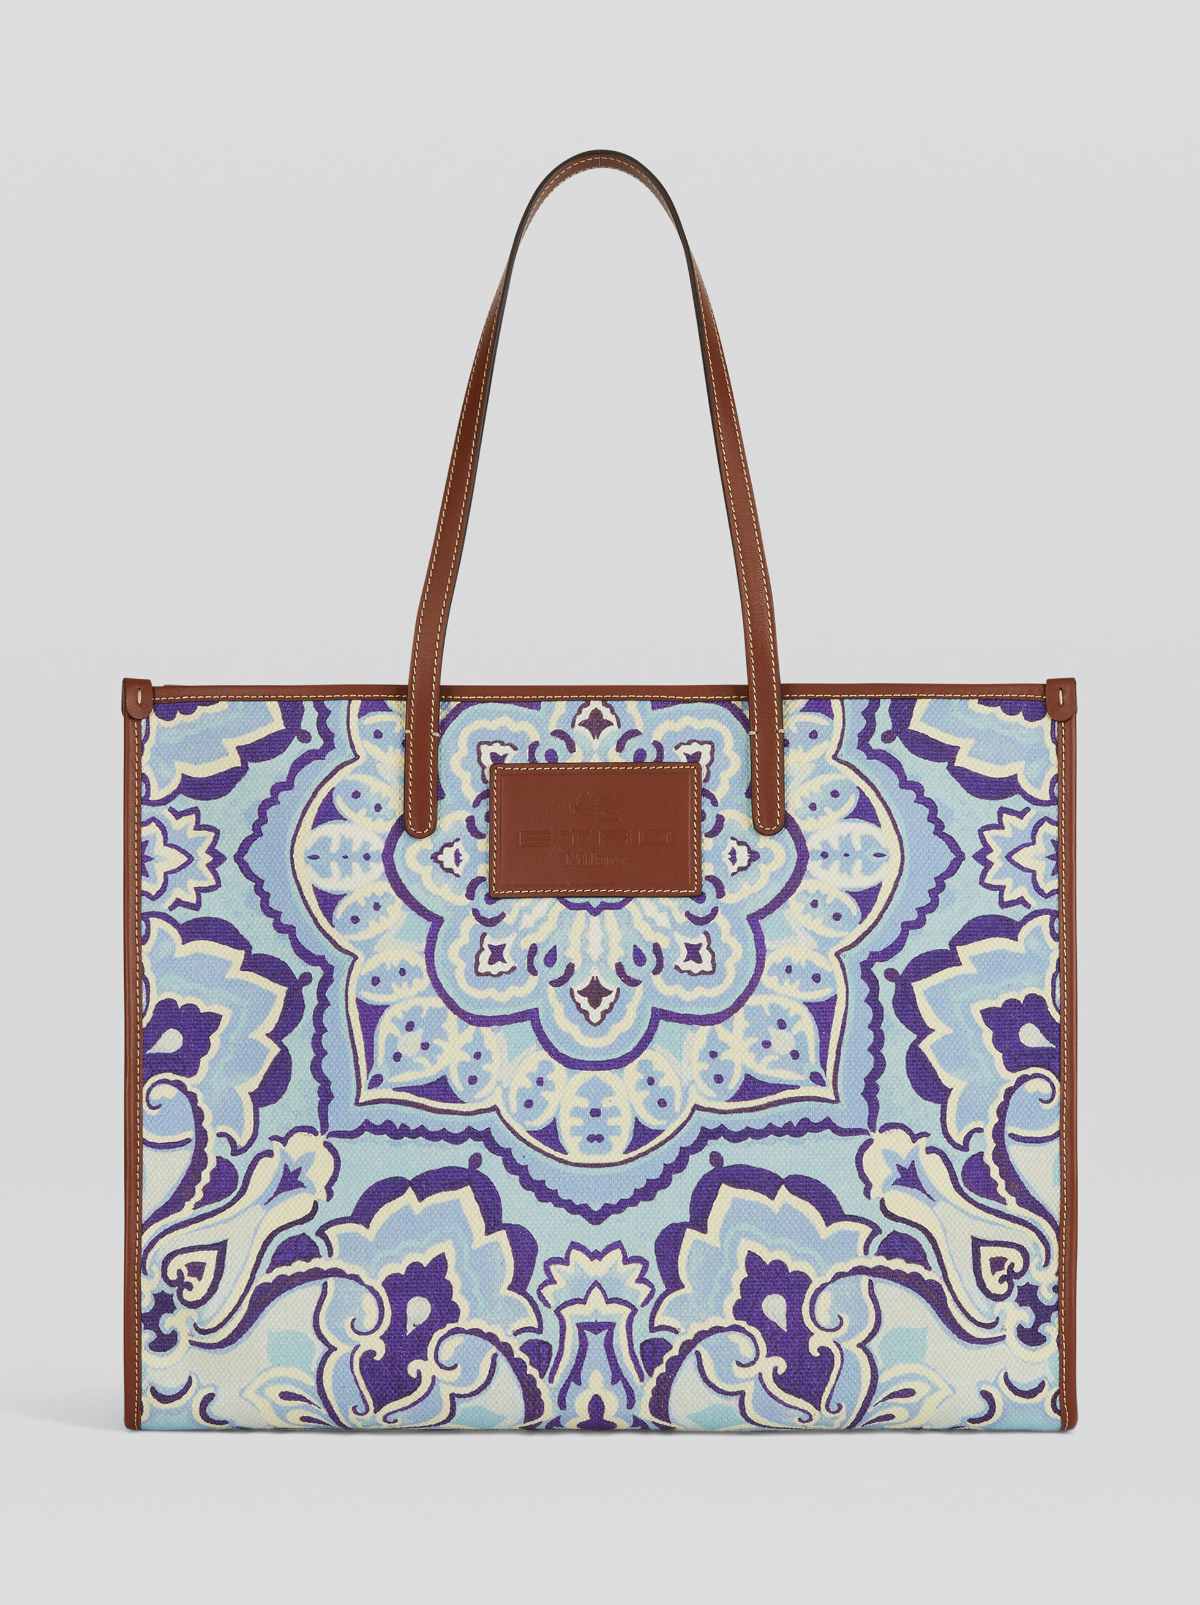 Etro Releases The New “Magic Mandala” Bags For Mother’s Day